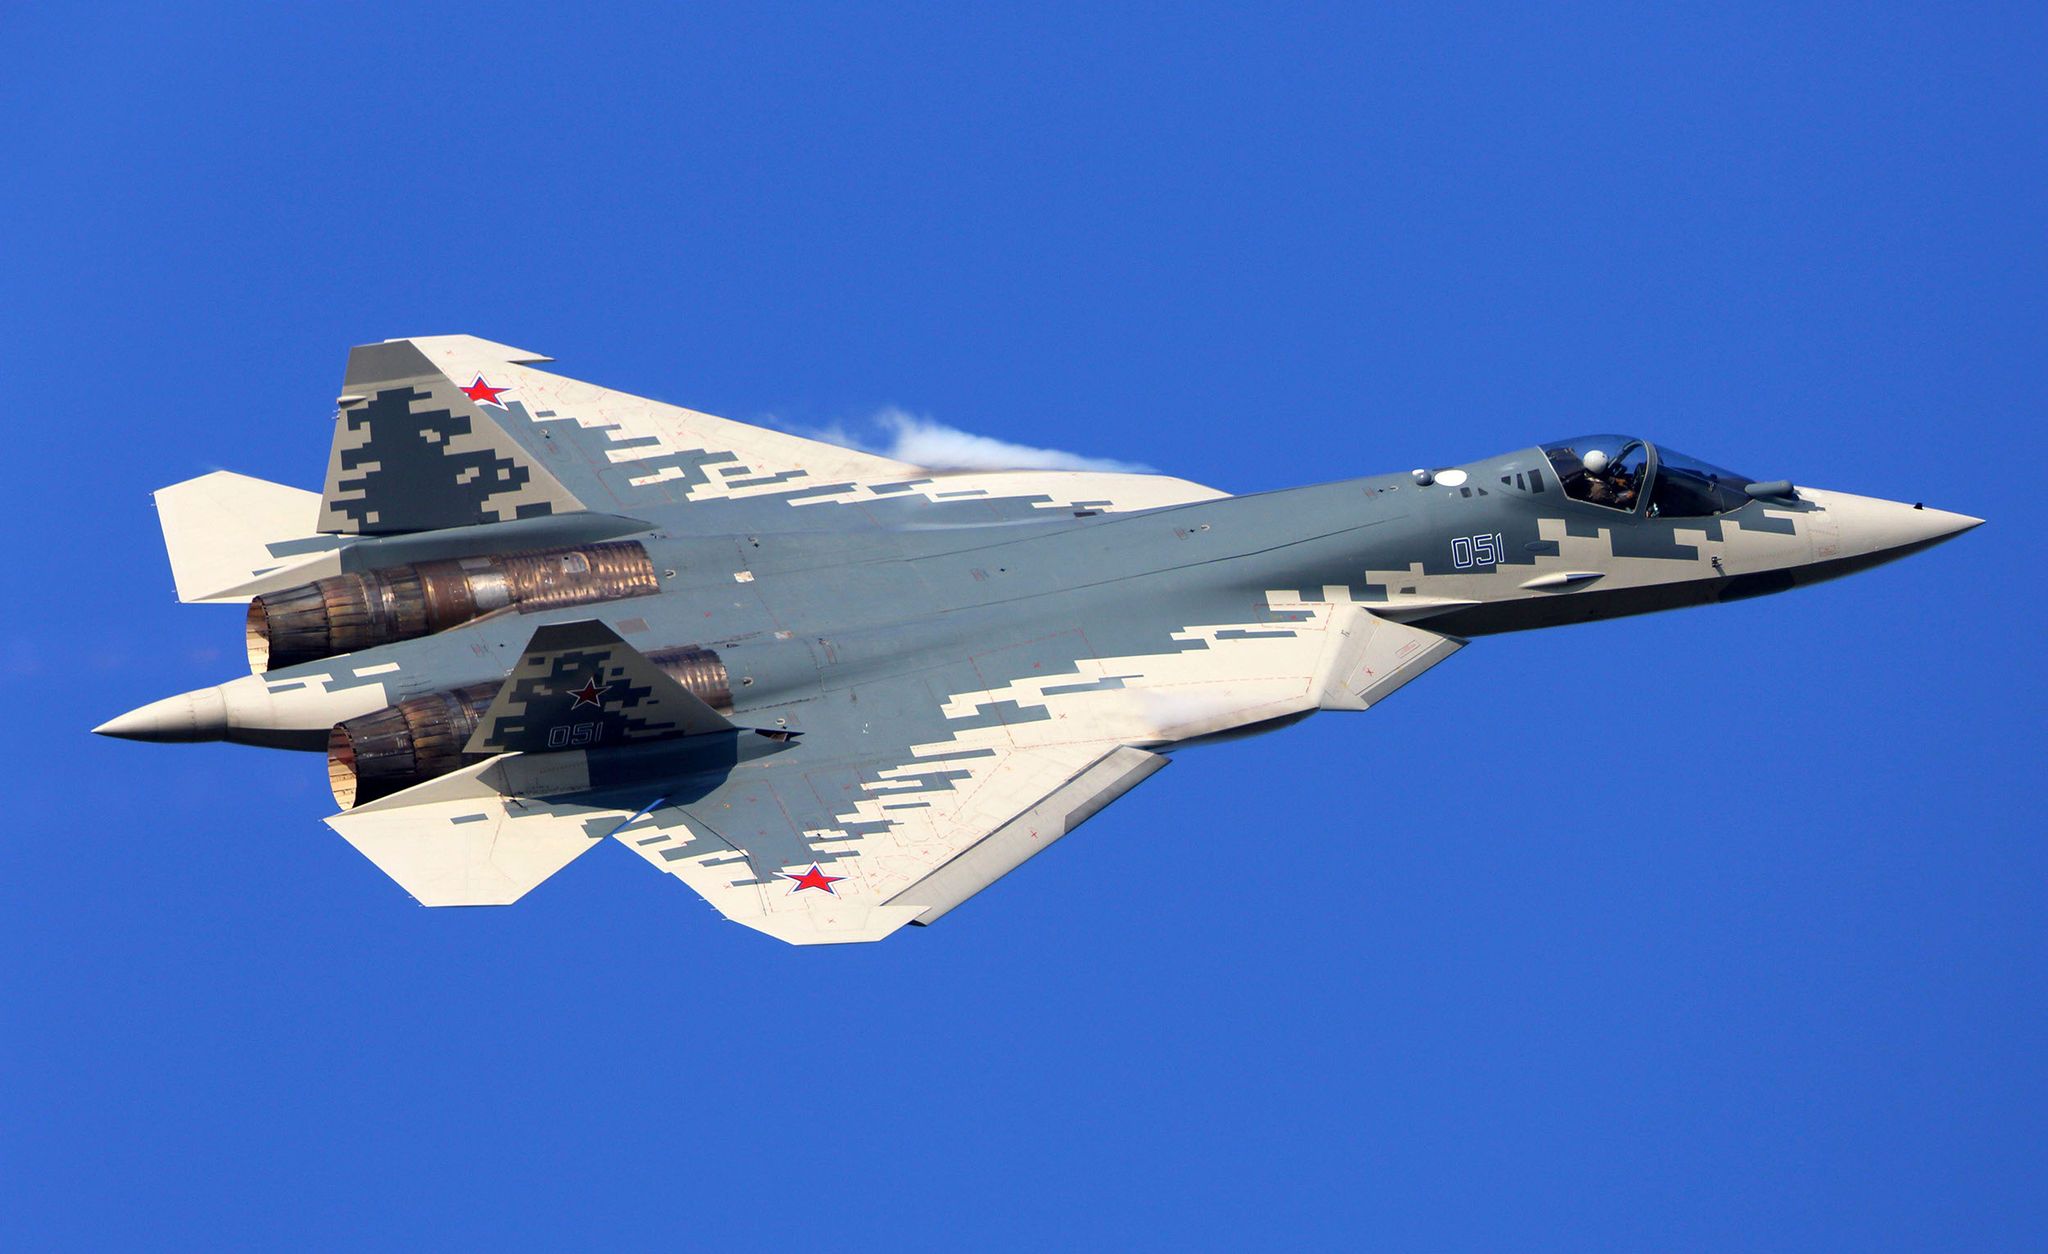 2b9c409 su 57 jet fighter of the russian air force against a blue sky